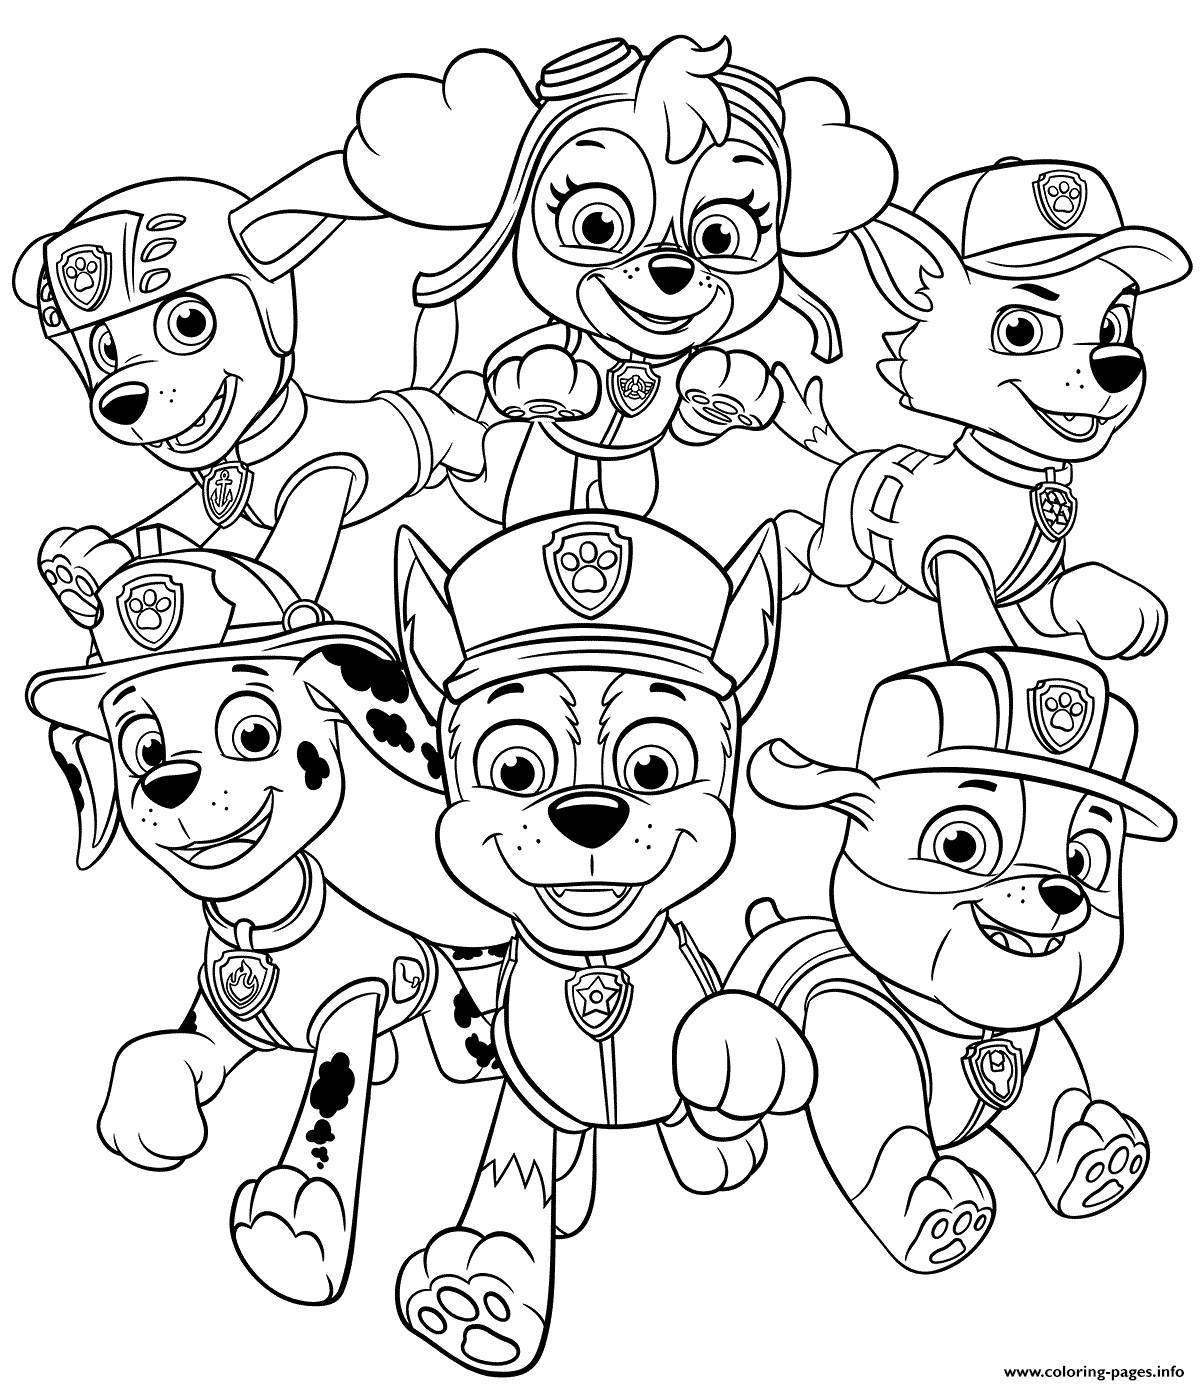 Rocky PAW Patrol coloring book